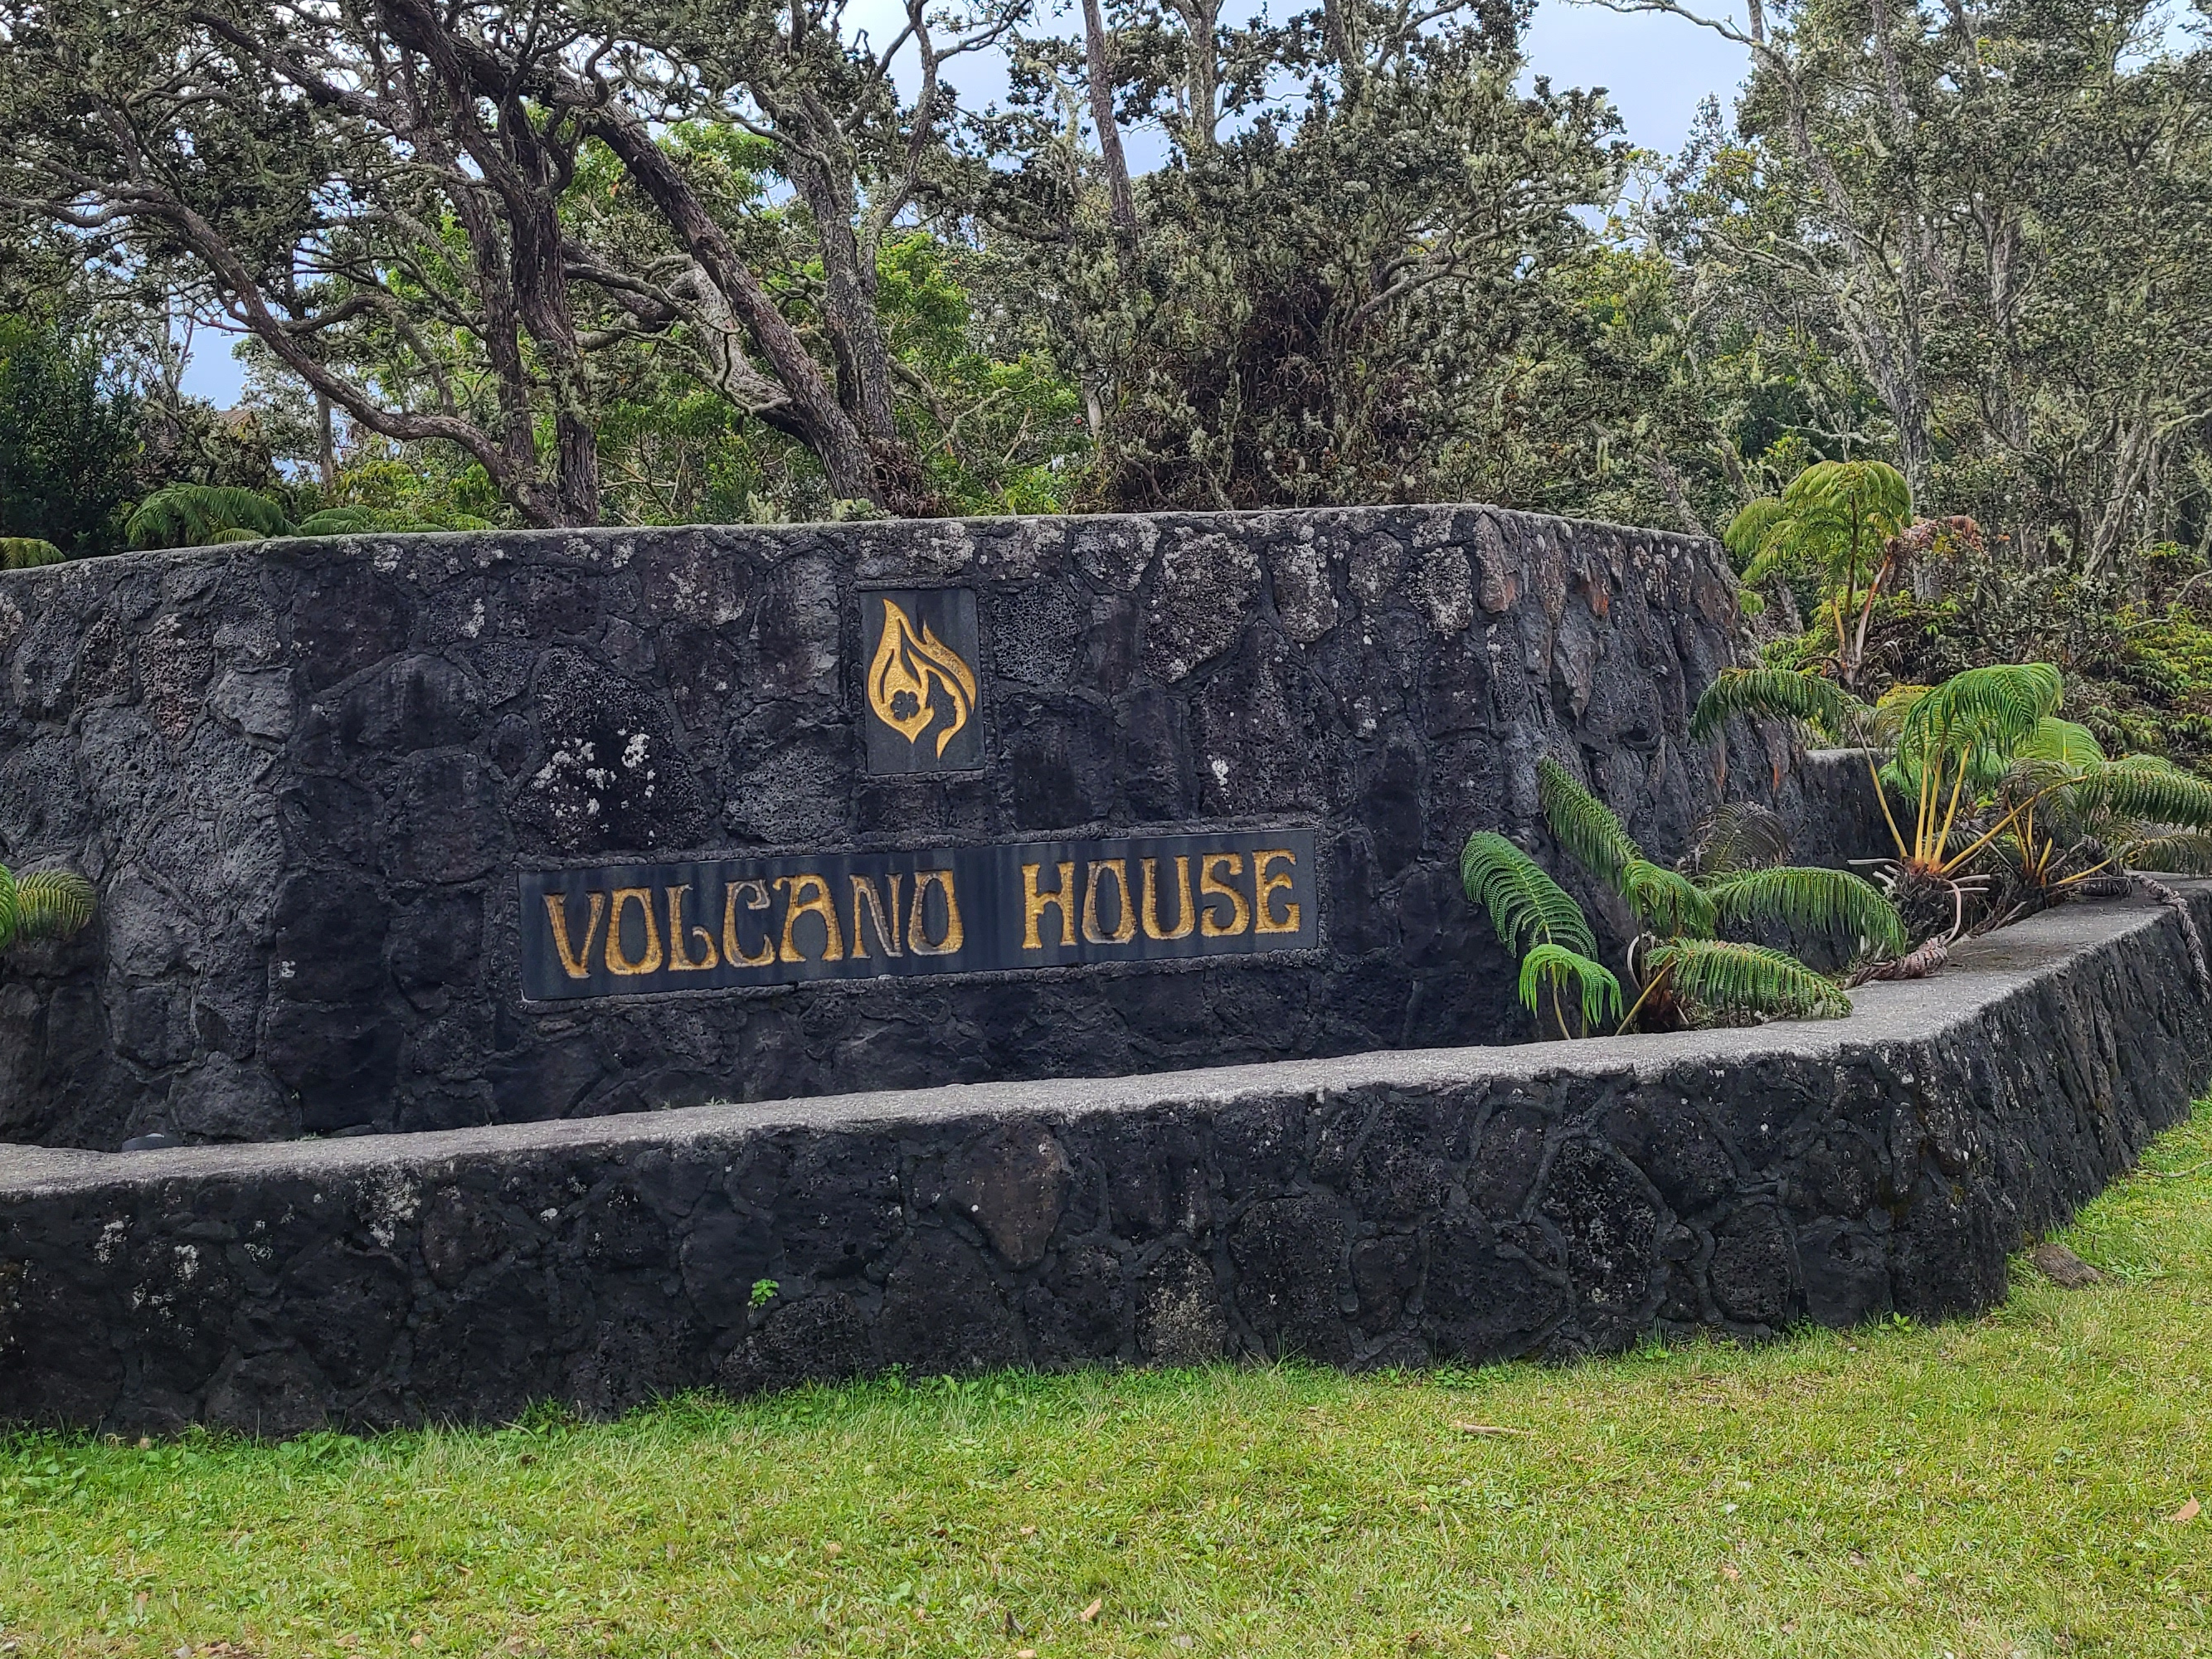 A large rocky sign the reads "Volcano House"